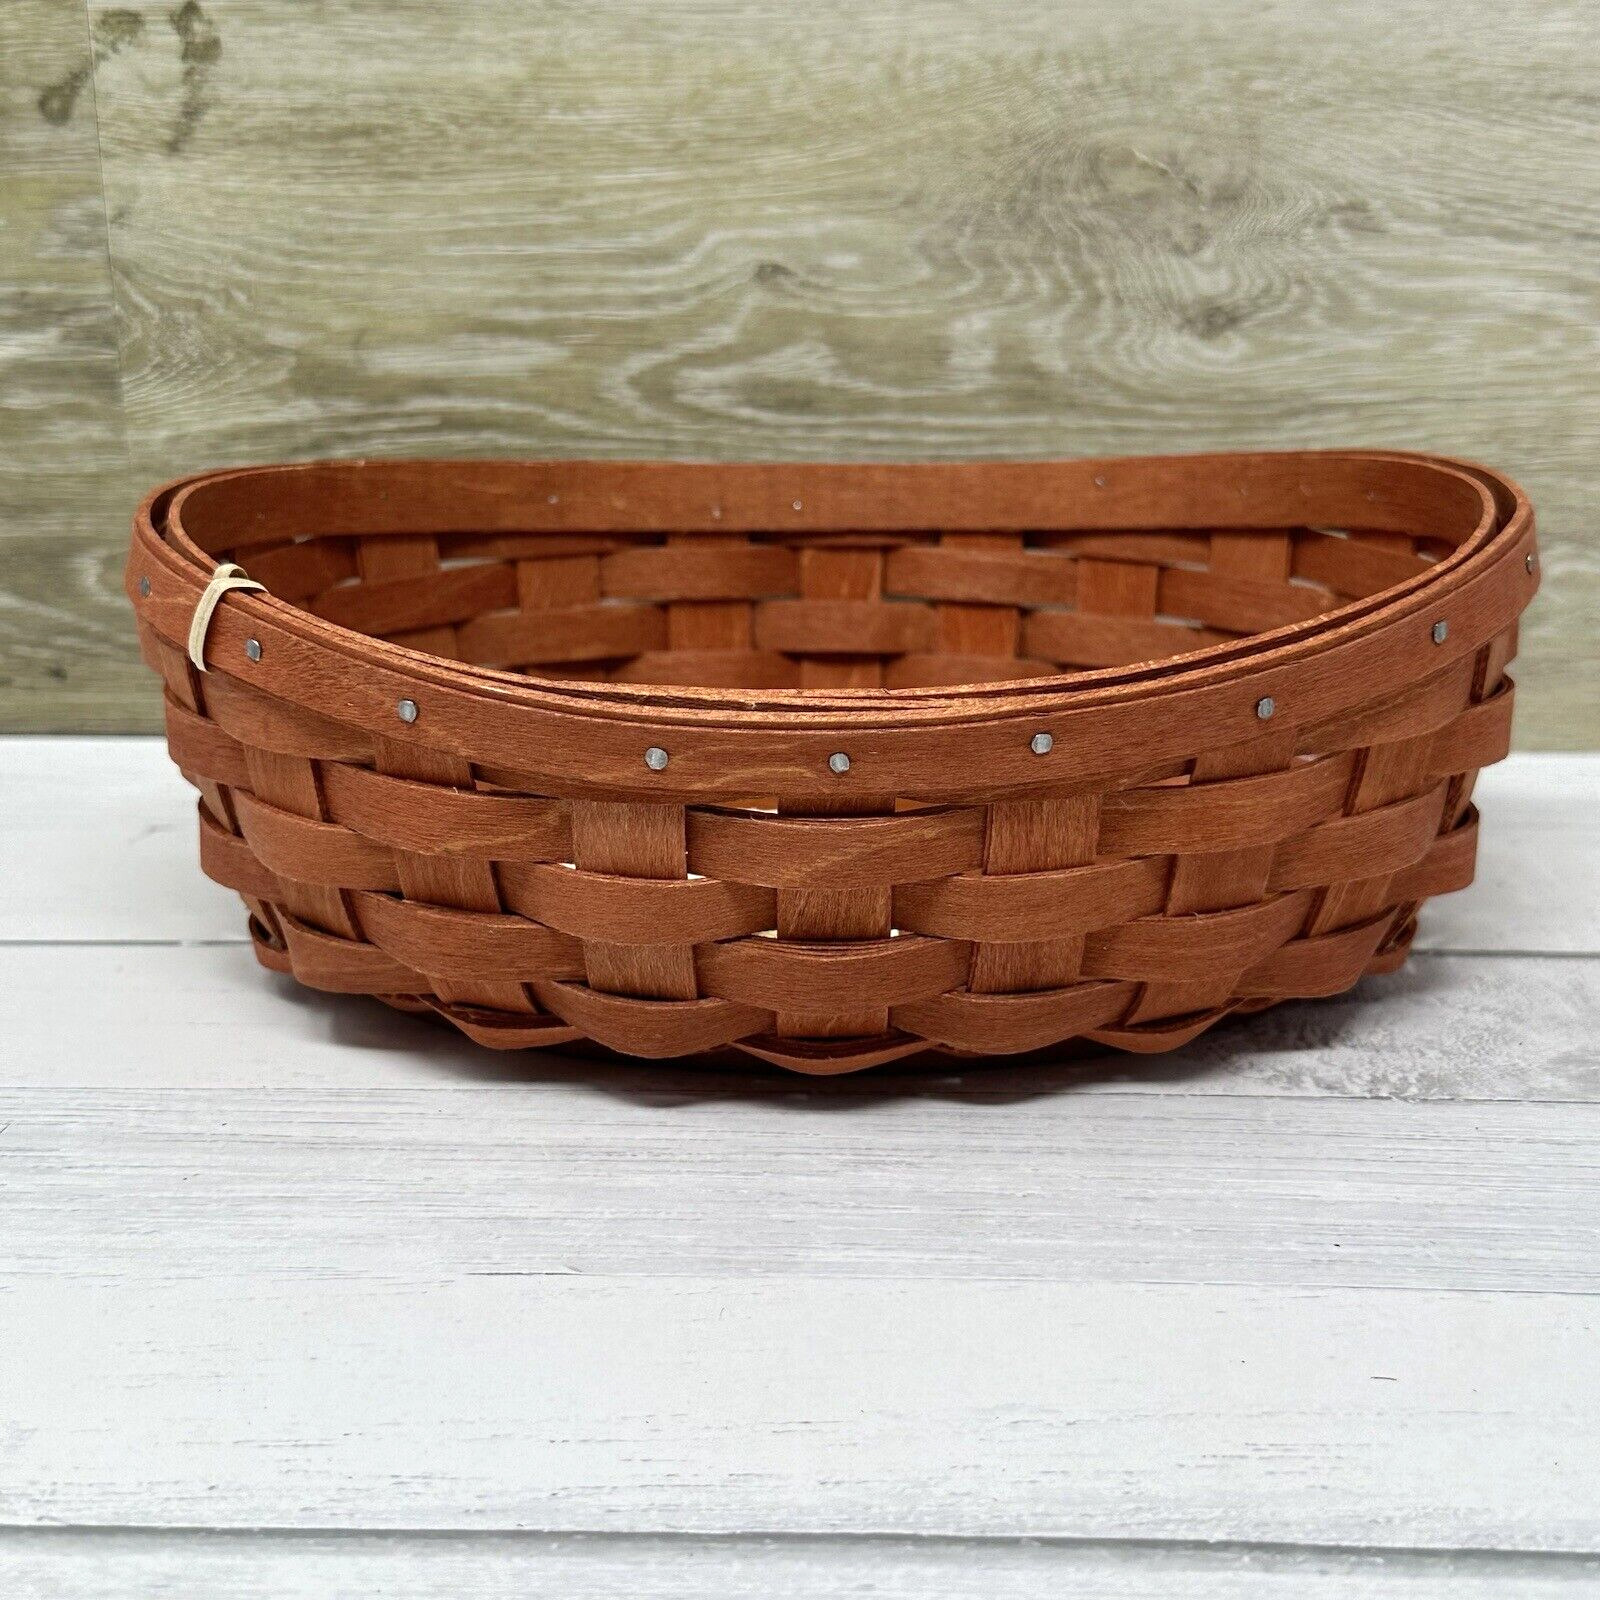 Rare Longaberger 2010 Small oval Swoop Basket in Spice